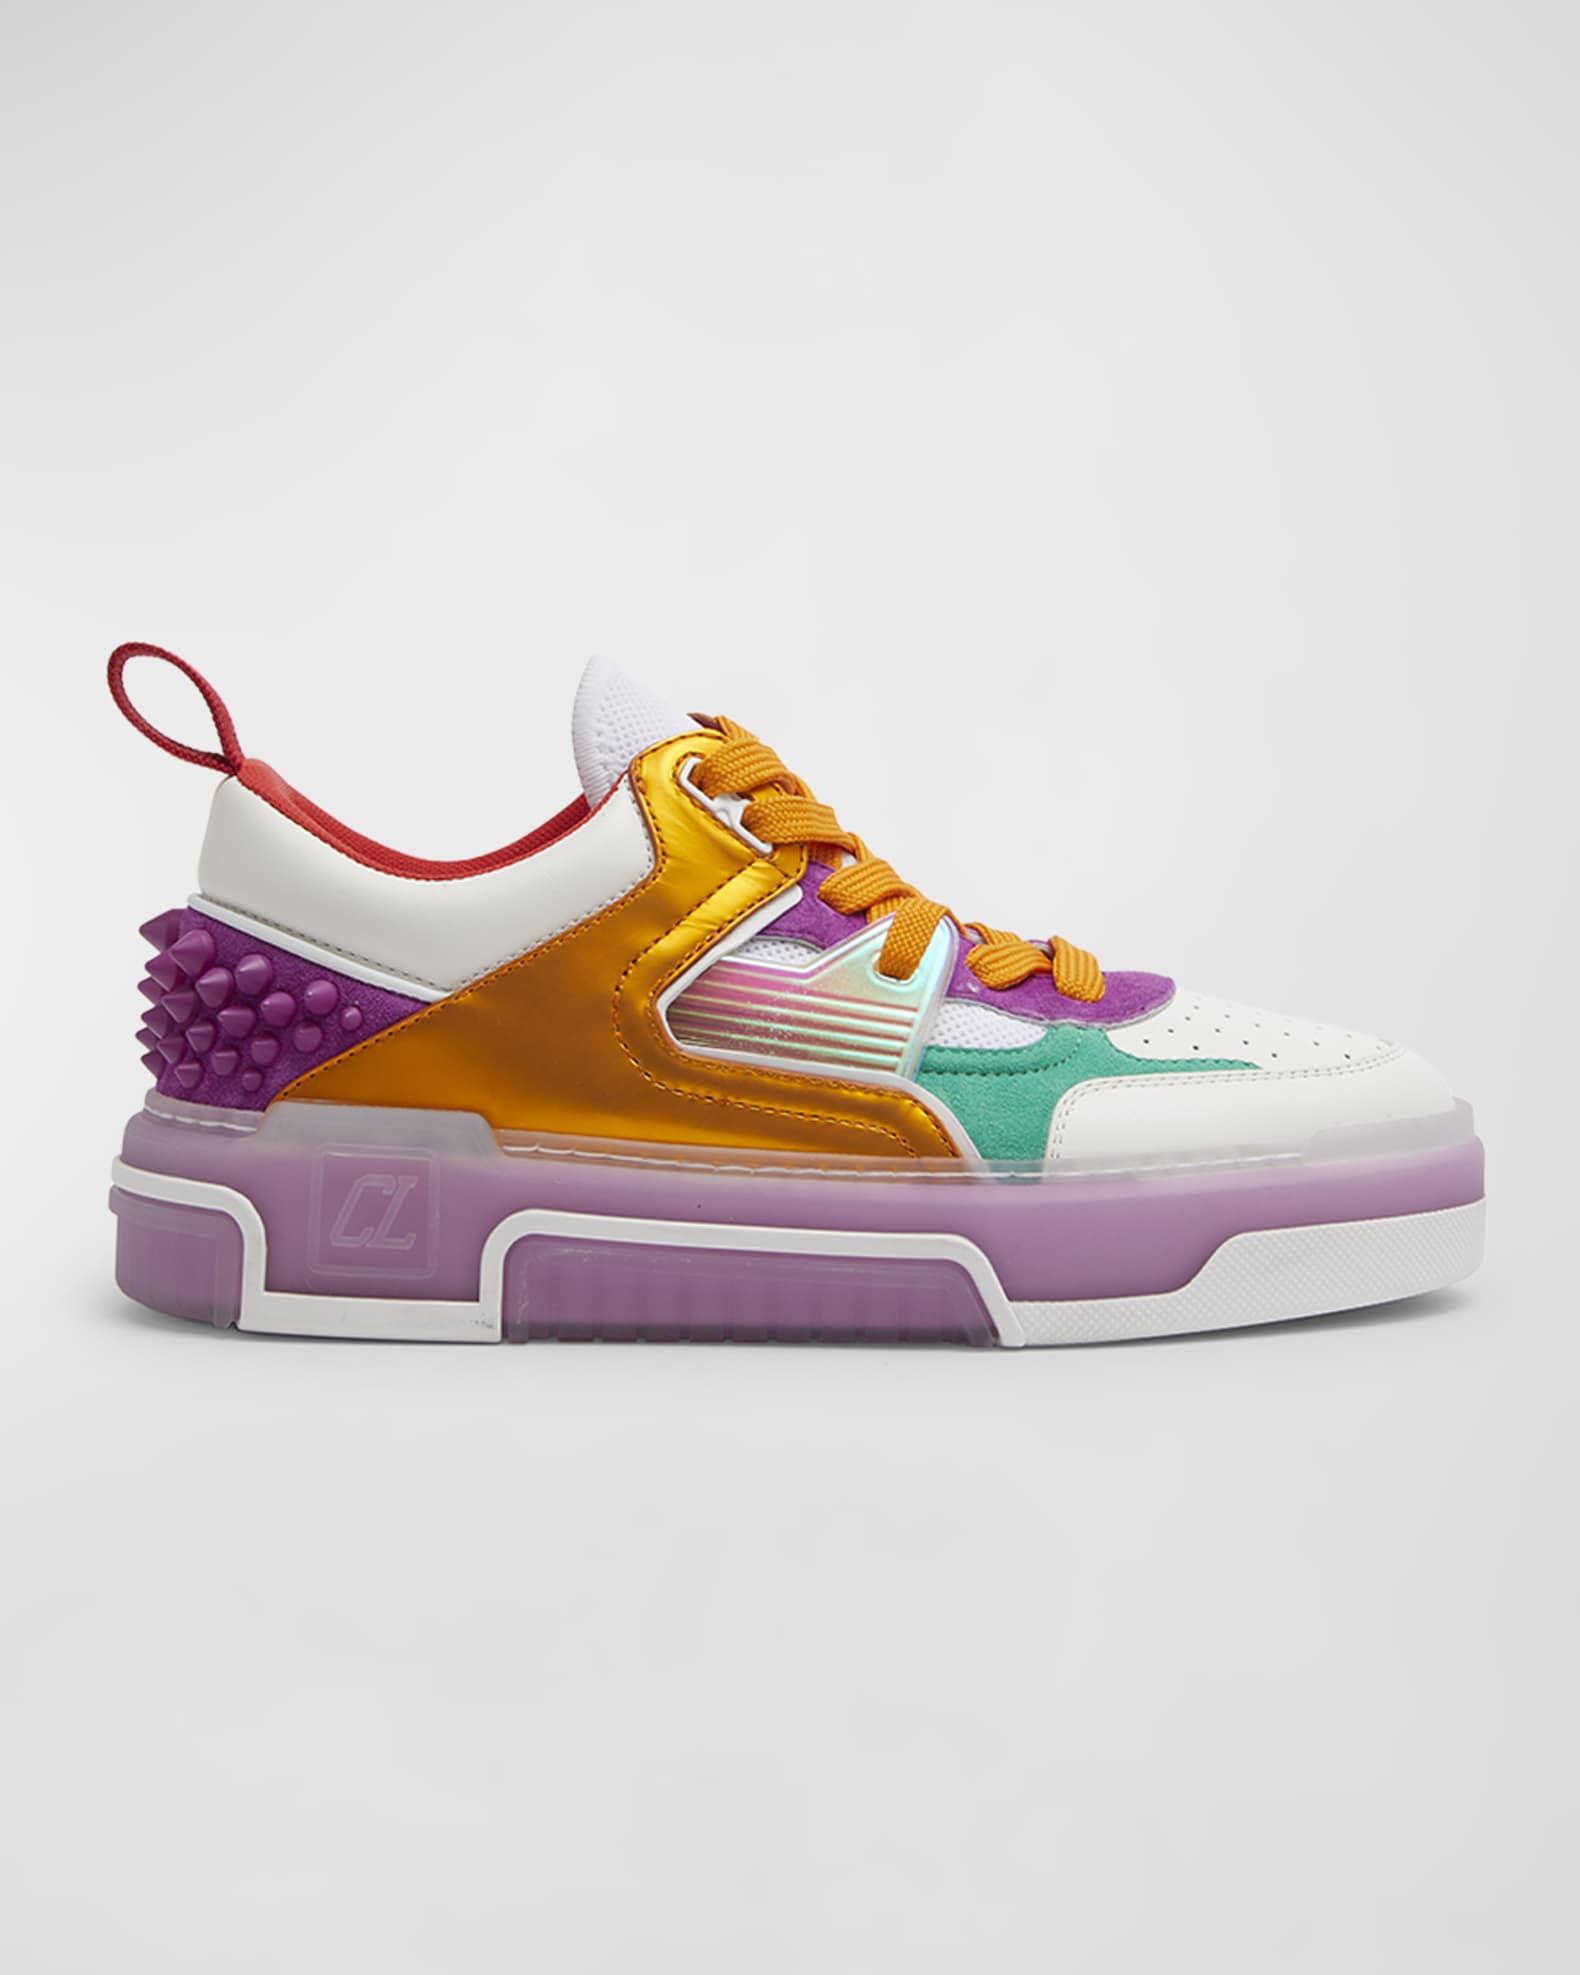 Christian Louboutin Astroloubi Donna Multicolor Spike Low-Top Sneakers ...